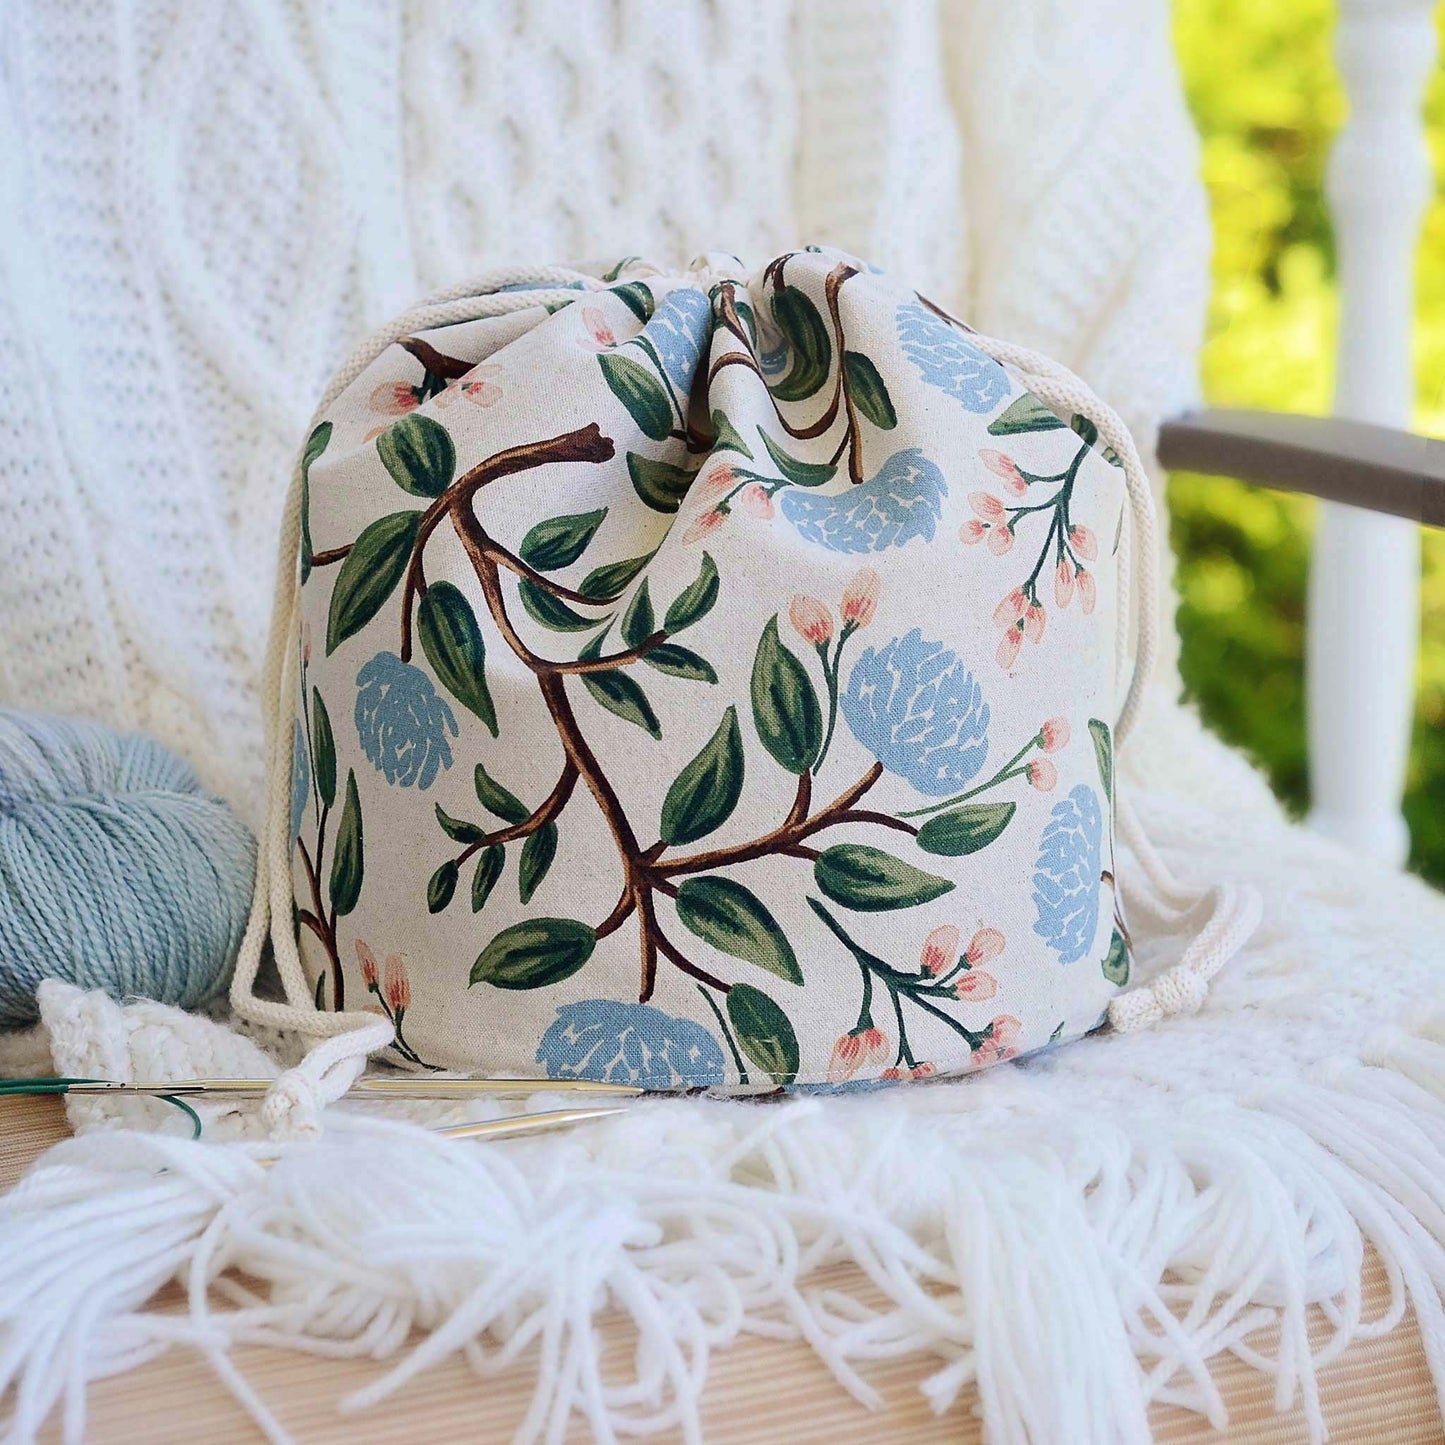 Peony canvas bucket bag in fabric from Rifle Paper Co.  Handmade in Canada by Yellow Petal Handmade.